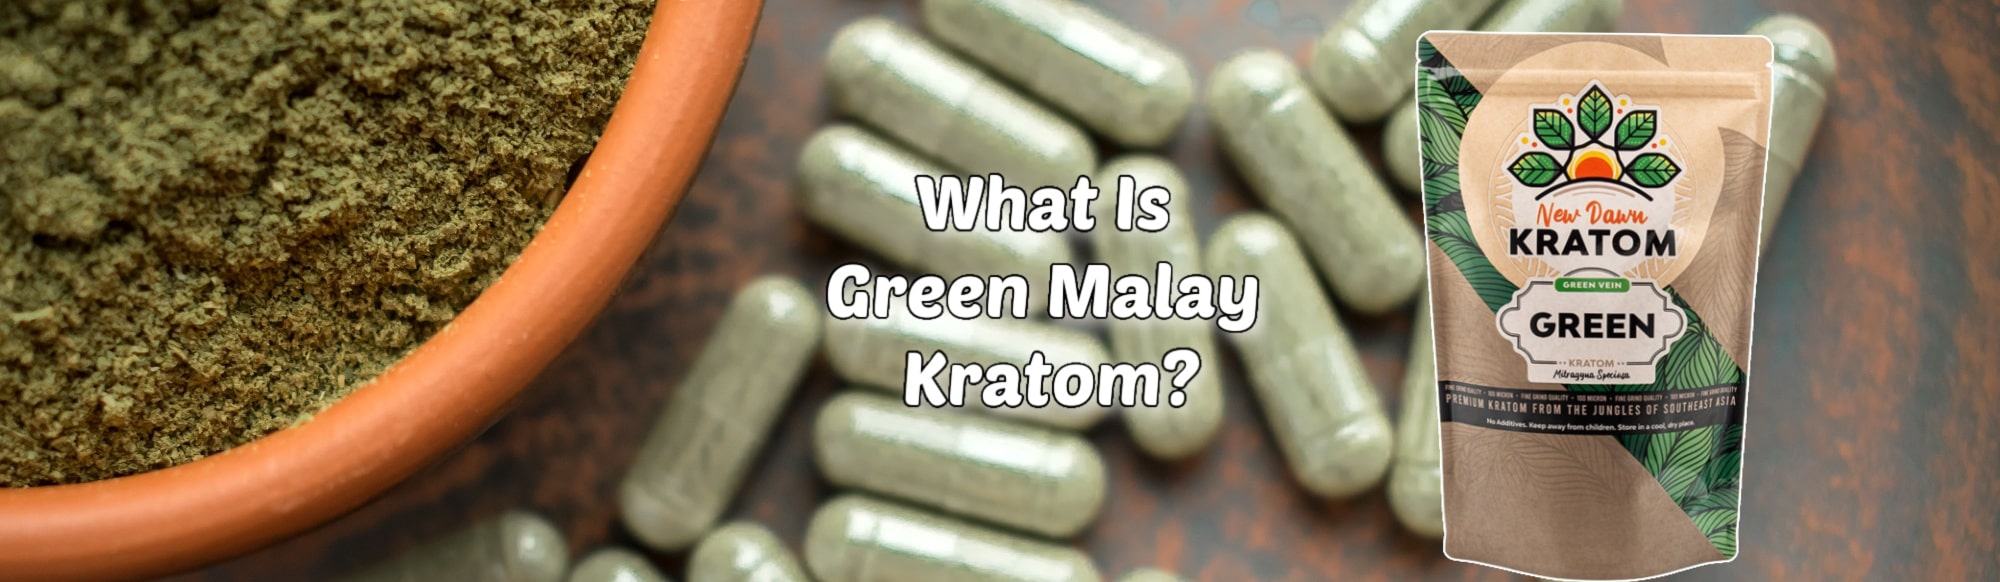 image of what is green malay kratom